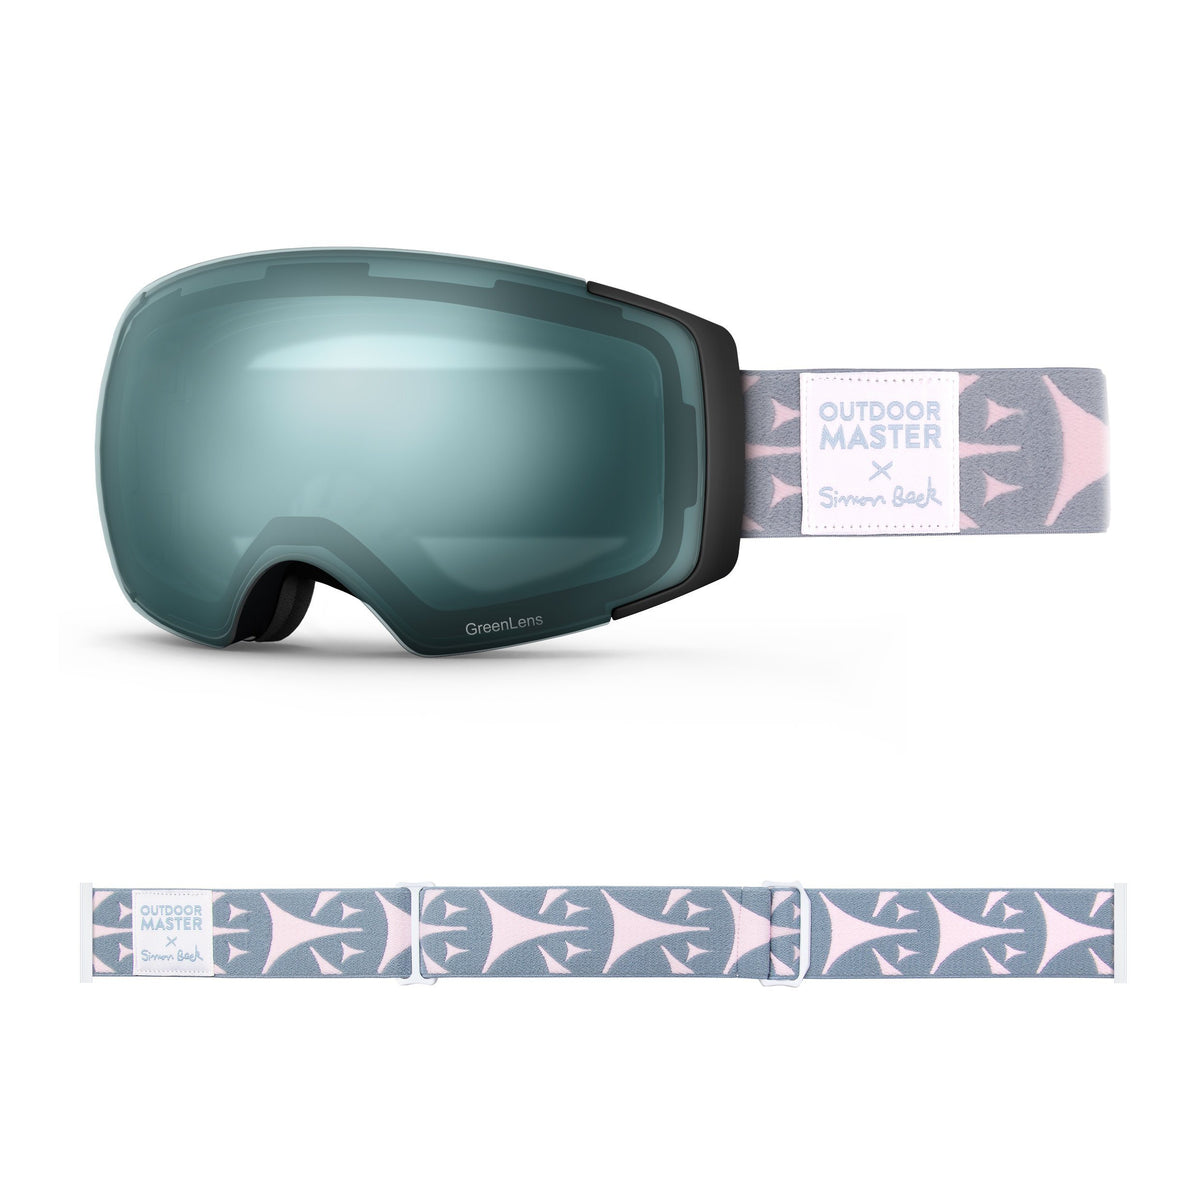 OutdoorMaster x Simon Beck Ski Goggles Pro Series - Snowshoeing Art Limited Edition OutdoorMaster GreenLens VLT 20% TAC Green Polarized Bouncy Triangles